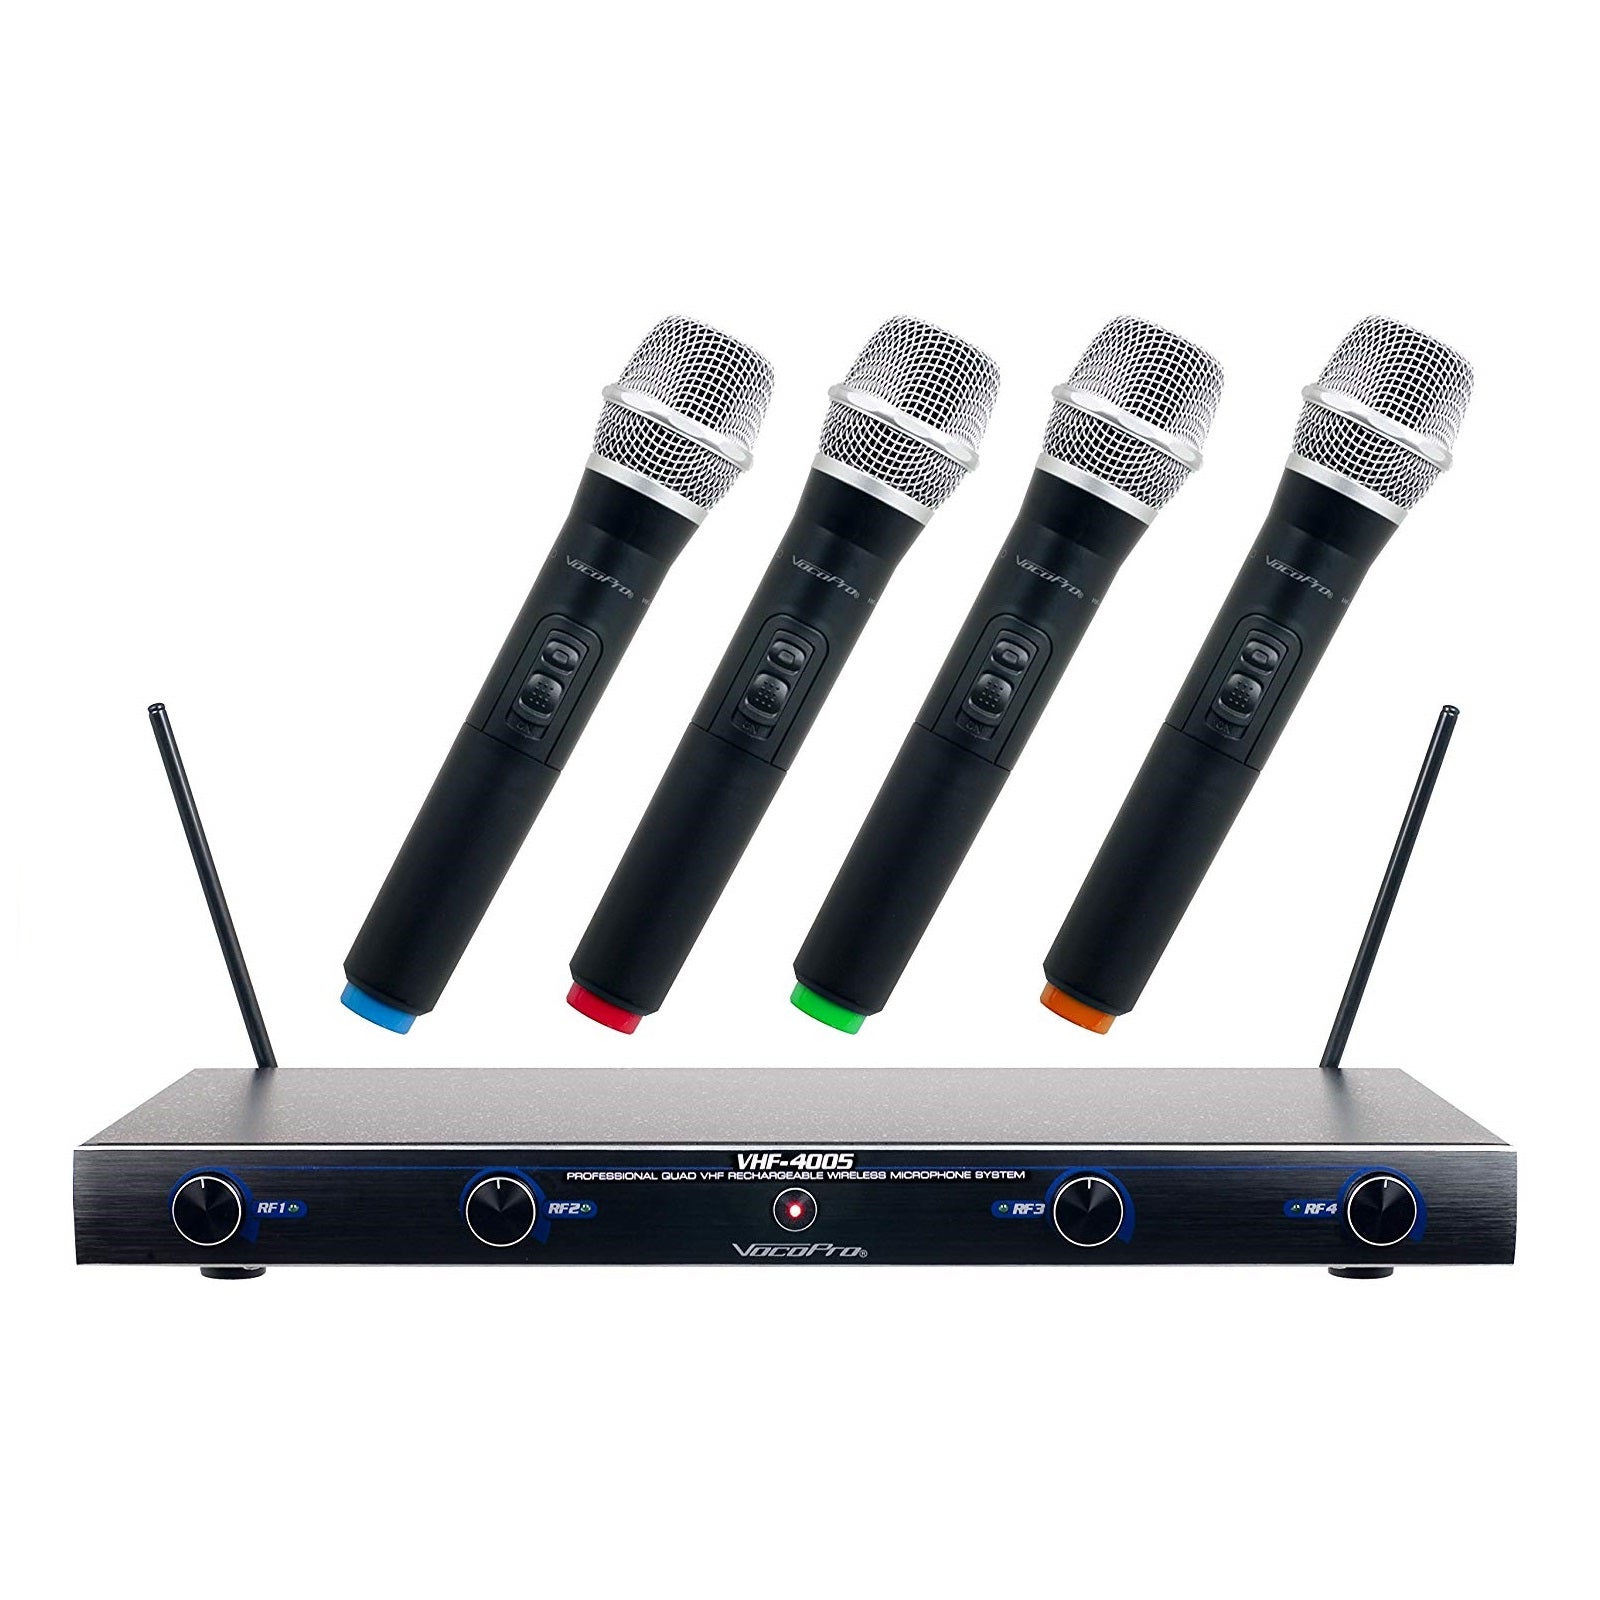 VocoPro VHF-4005 Wireless Microphone Rechargeable System